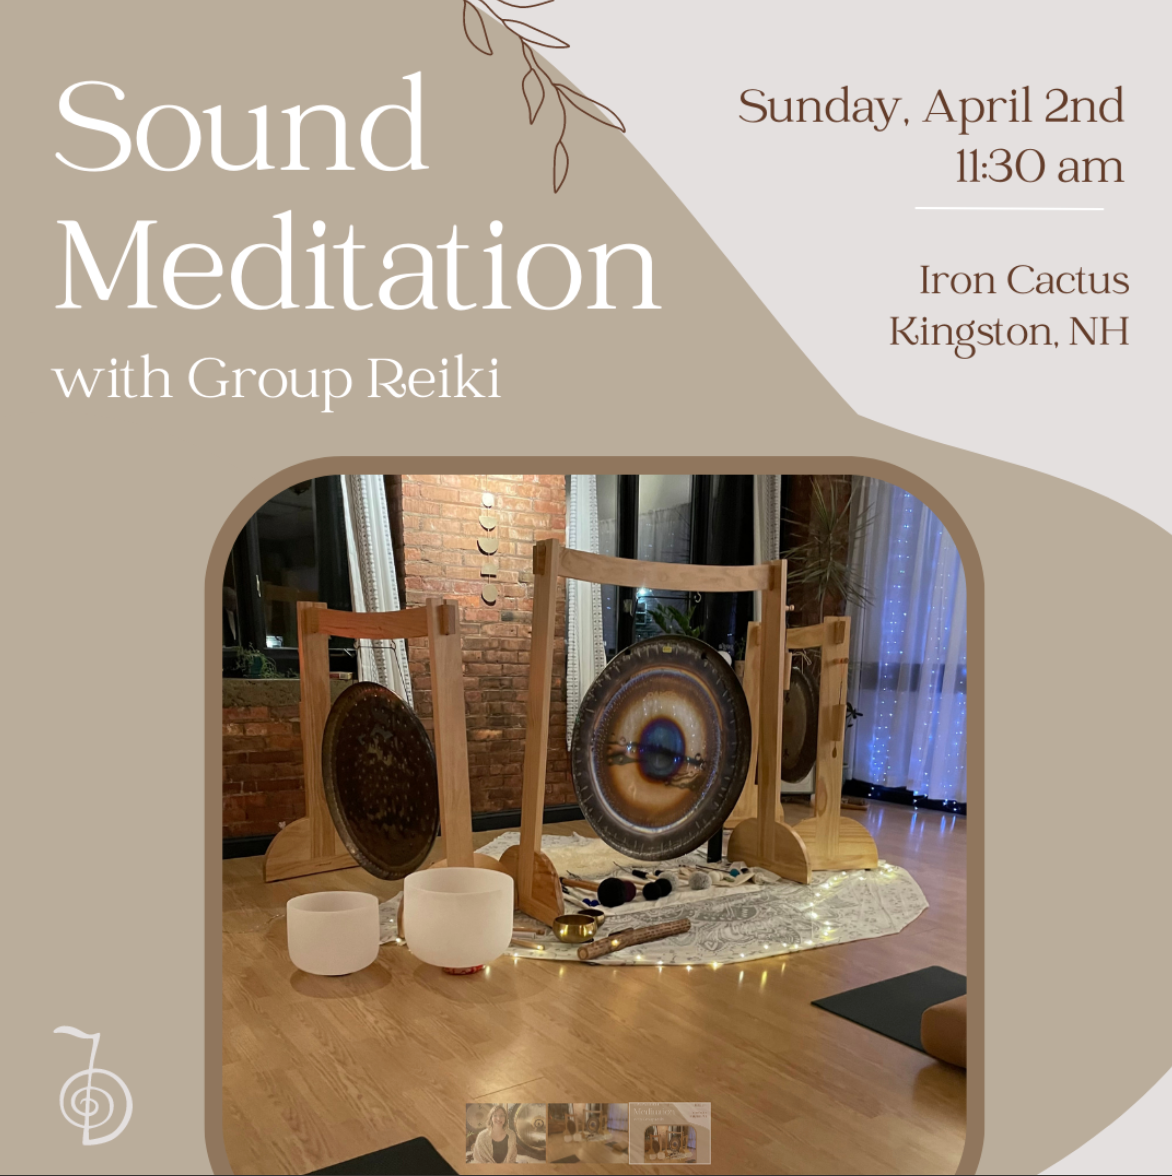 Sound Meditation with Group Reiki - Sun, May 7th @ 11:15 AM-12:15 PM